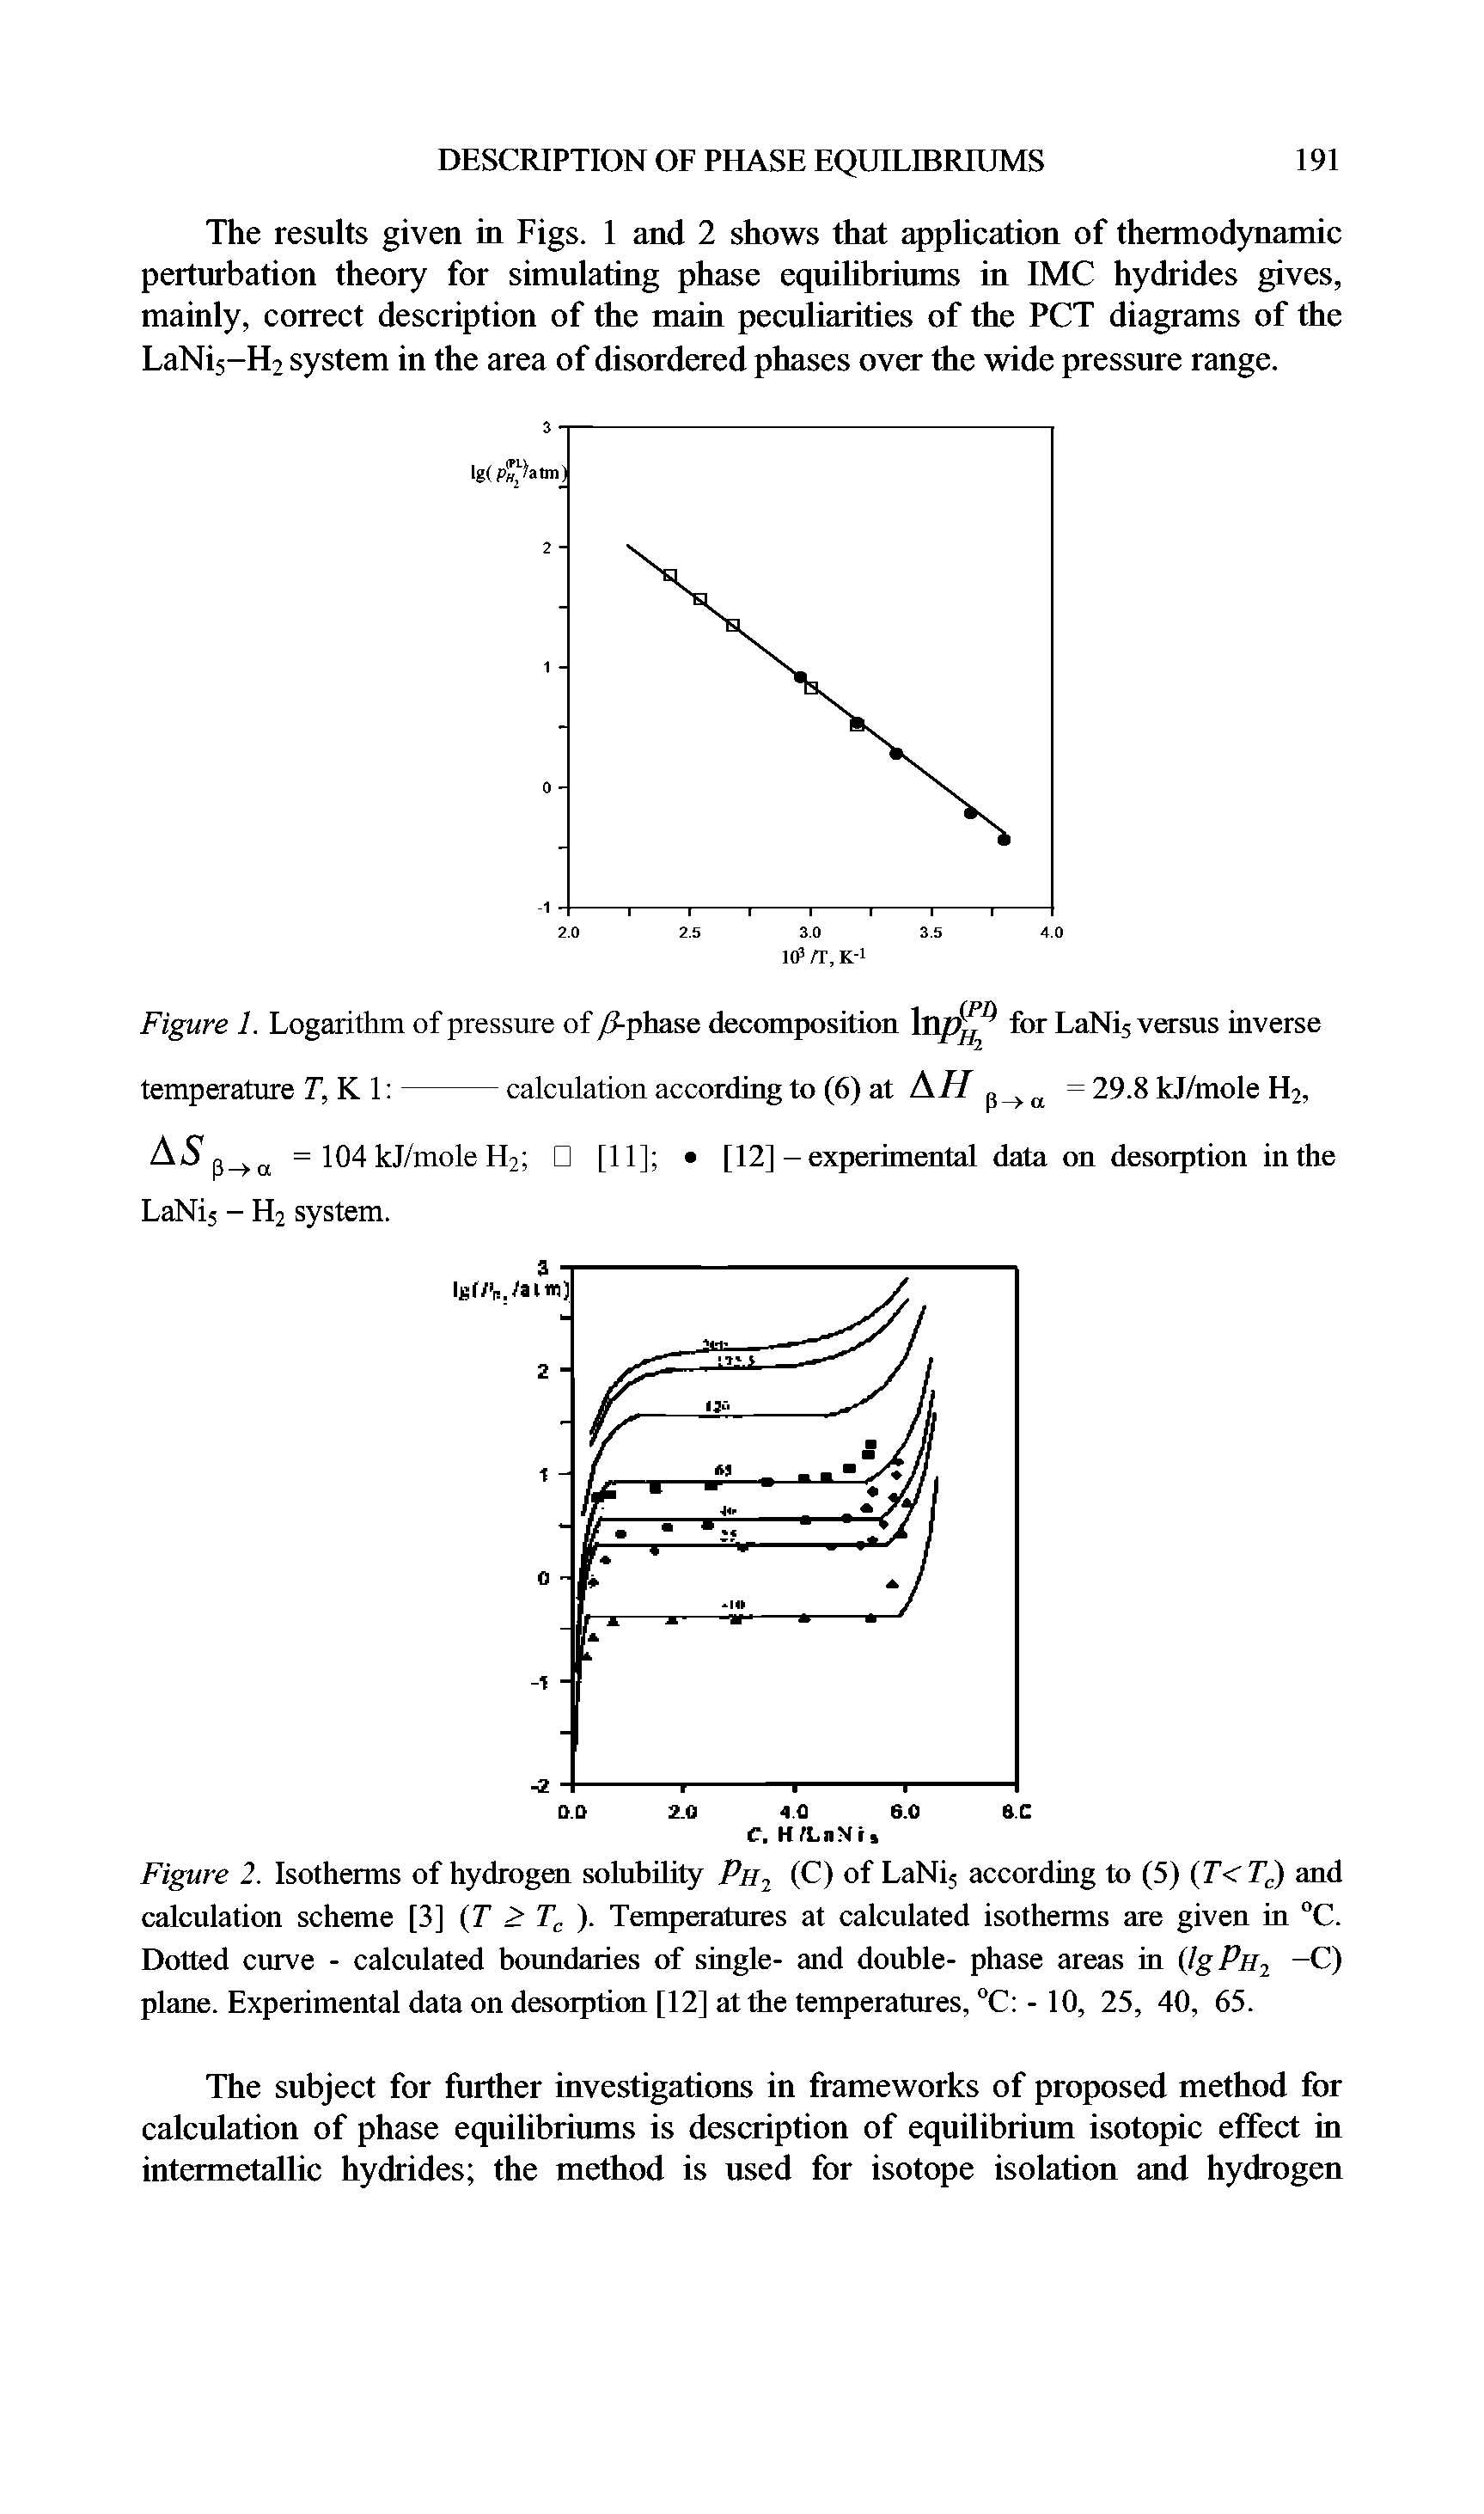 Figure 1. Logarithm of pressure of />-phase decomposition for LaNi5 versus inverse...